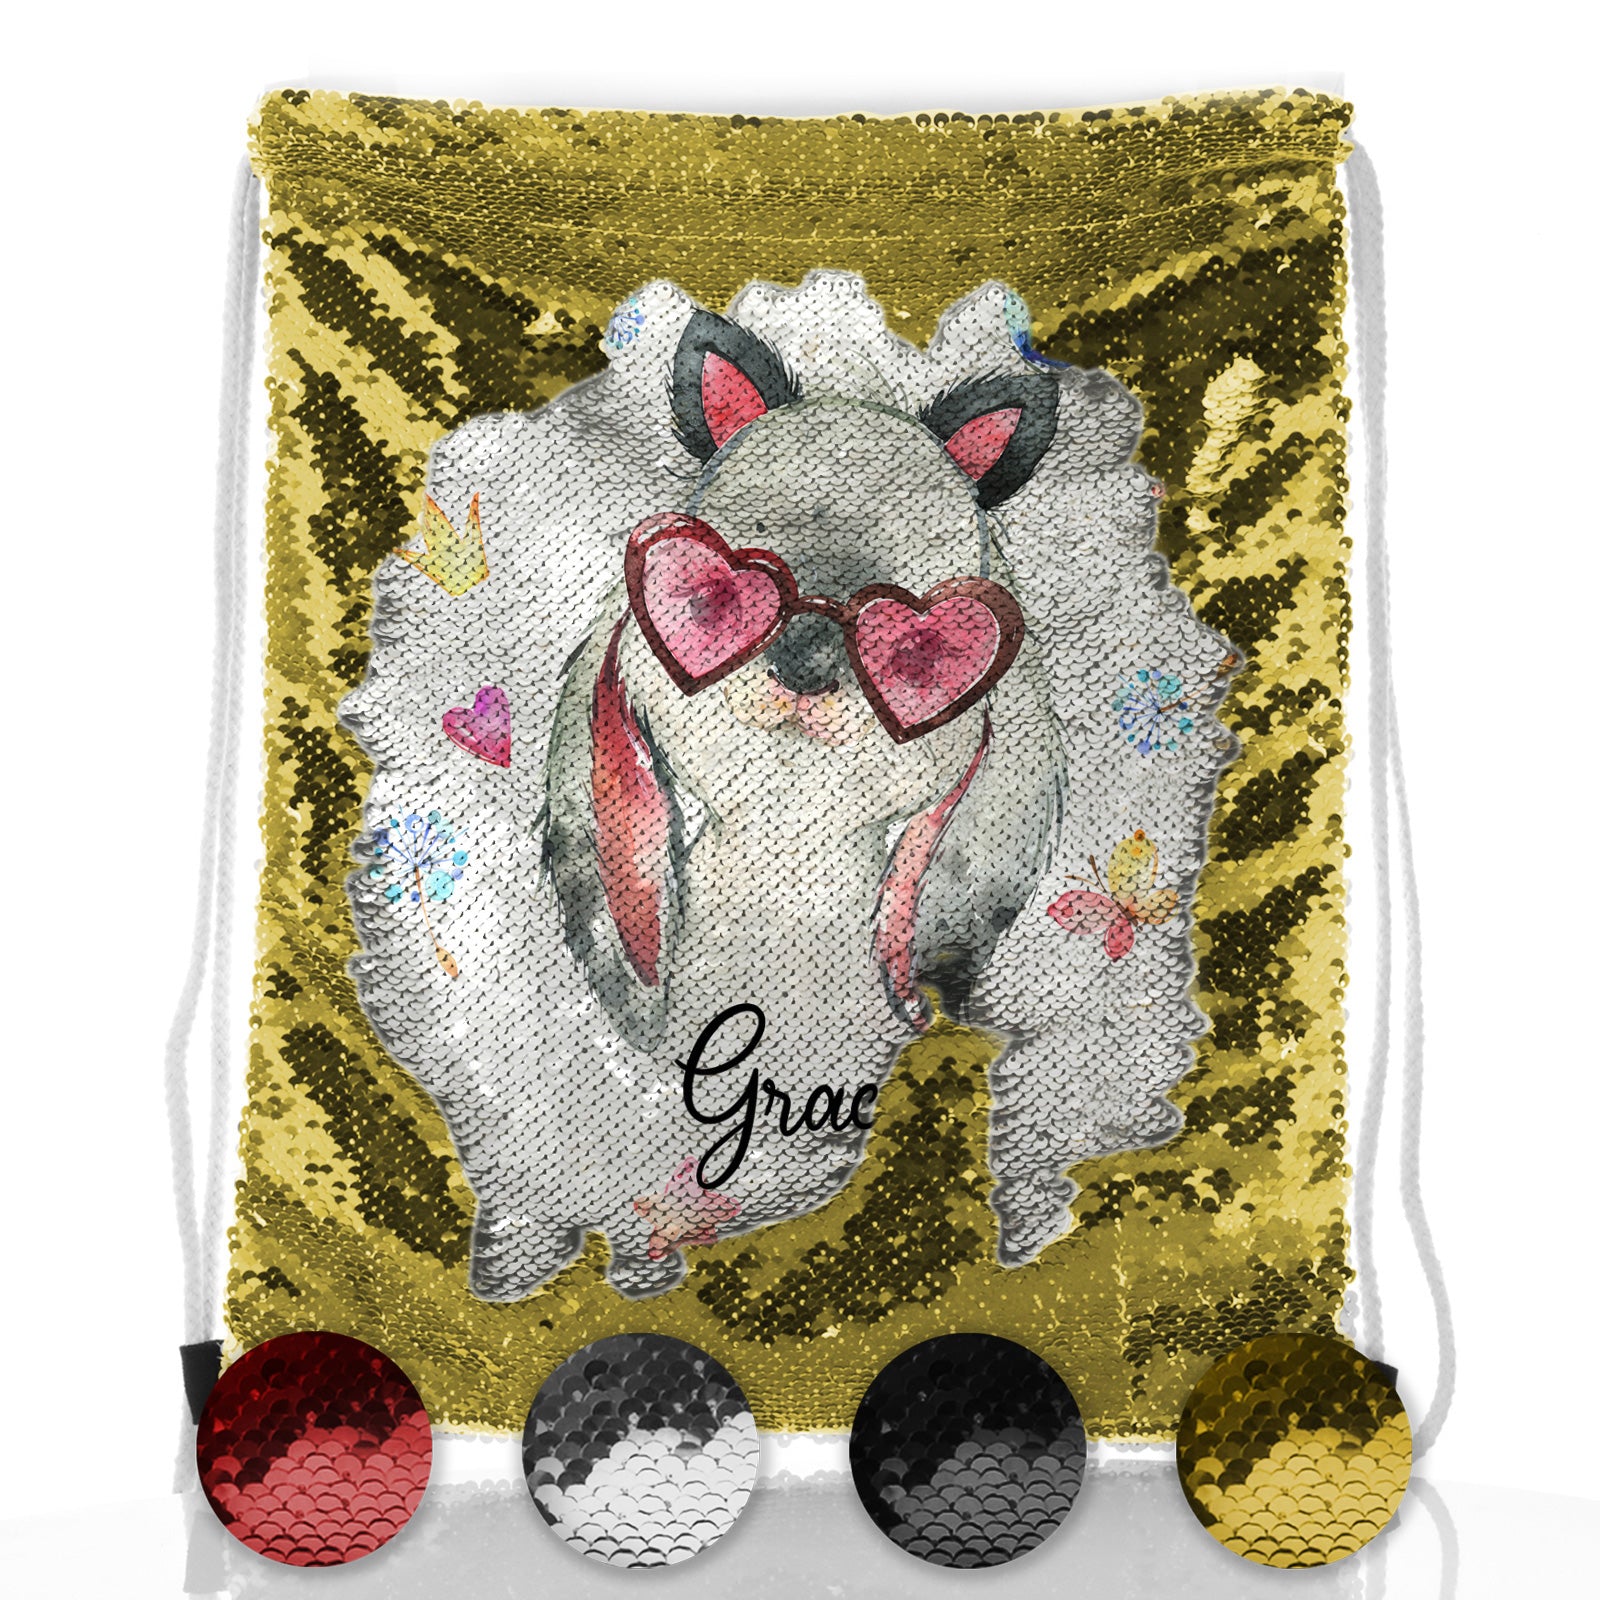 Personalised Sequin Drawstring Backpack with Grey Rabbit with Cat ears and Pink Heart Glasses and Cute Text